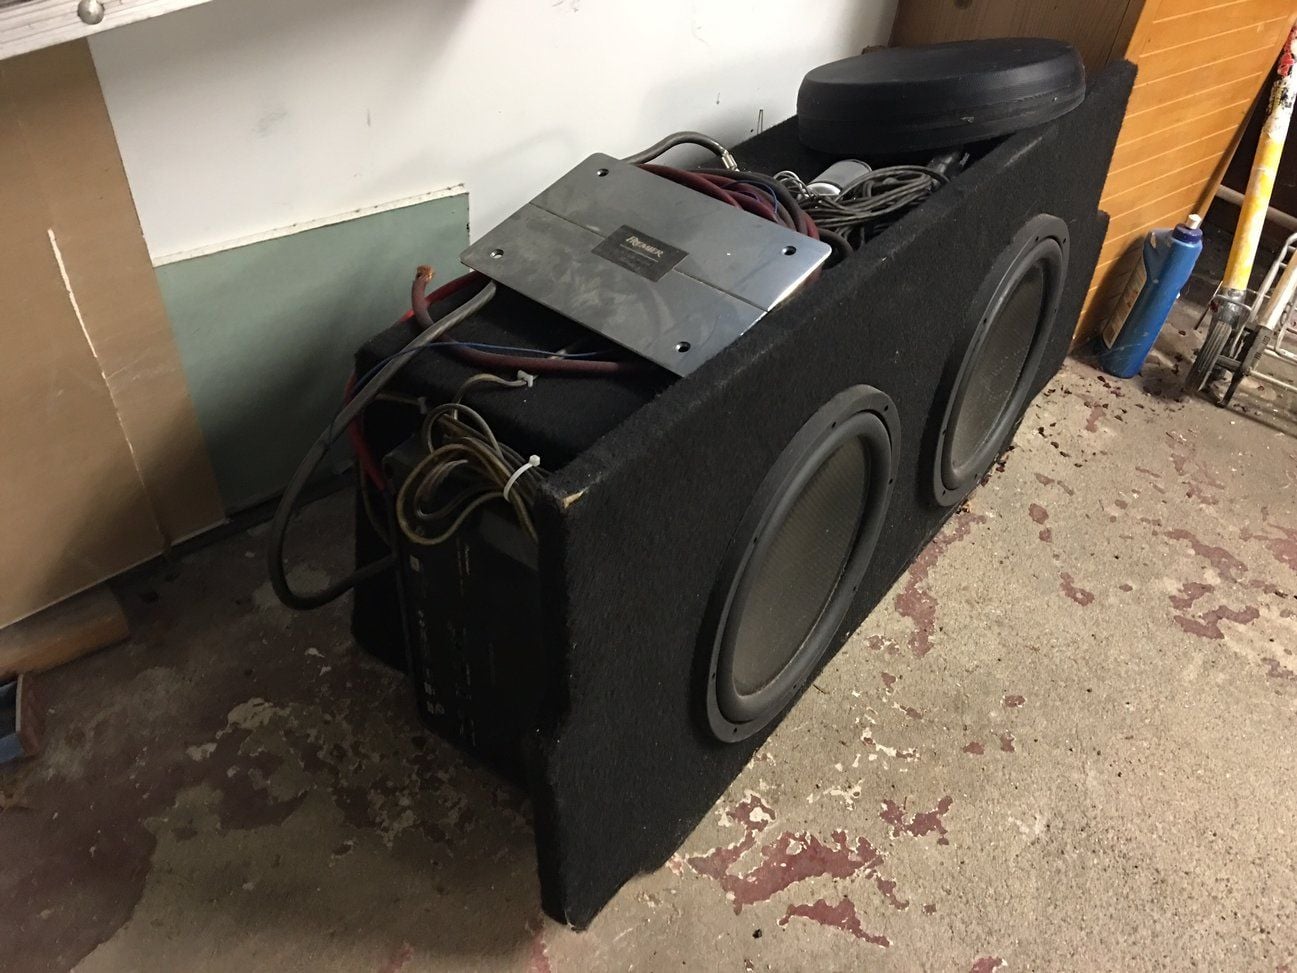 Audio Video/Electronics - EXPIRED: Custom TL sub box and system - Used - 2004 to 2008 Acura TL - Fort Lee, NJ 07024, United States